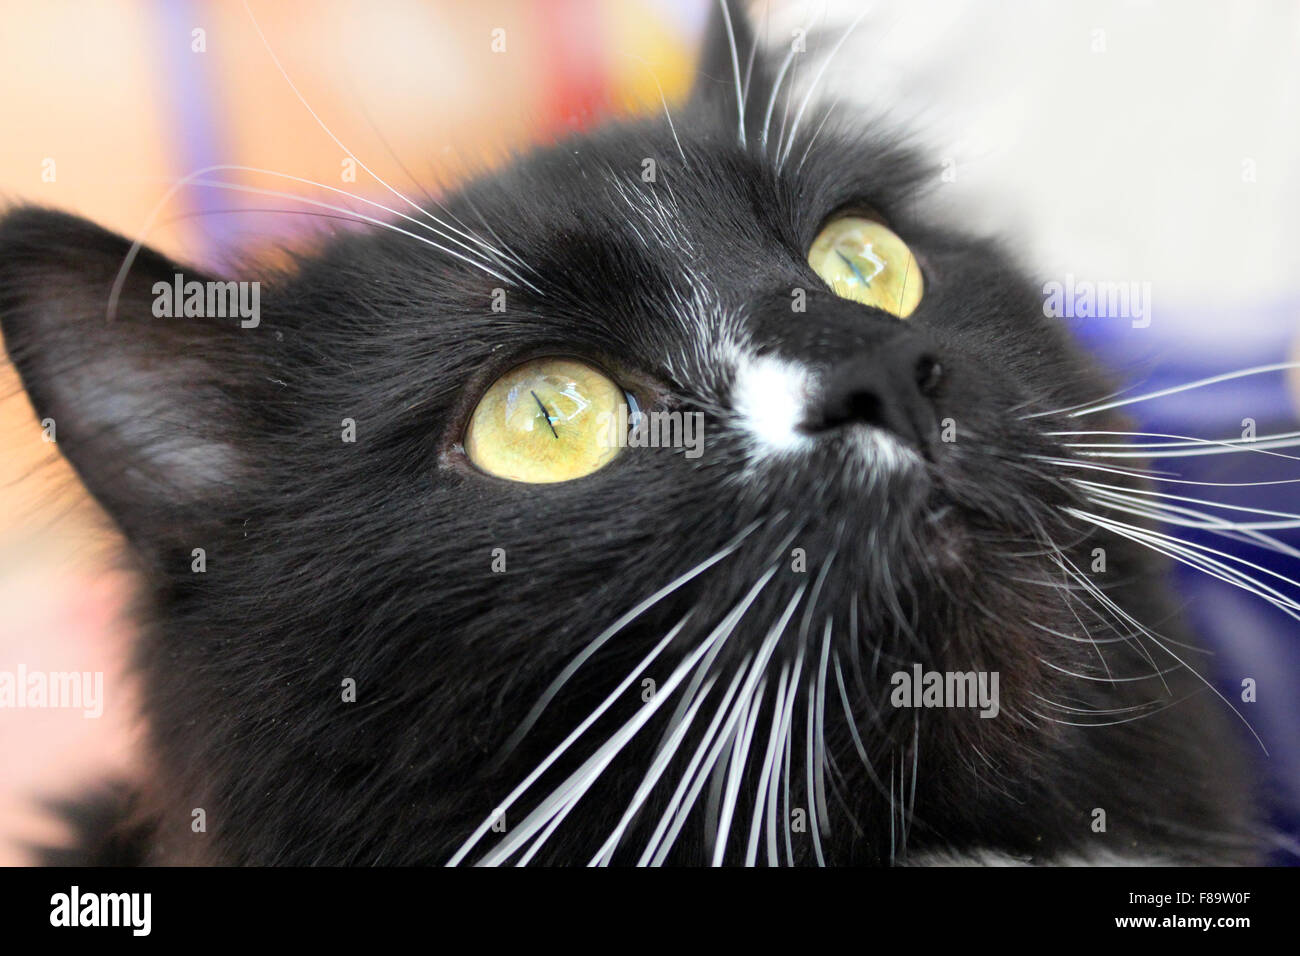 close-up of muzzle of black cat staring Stock Photo